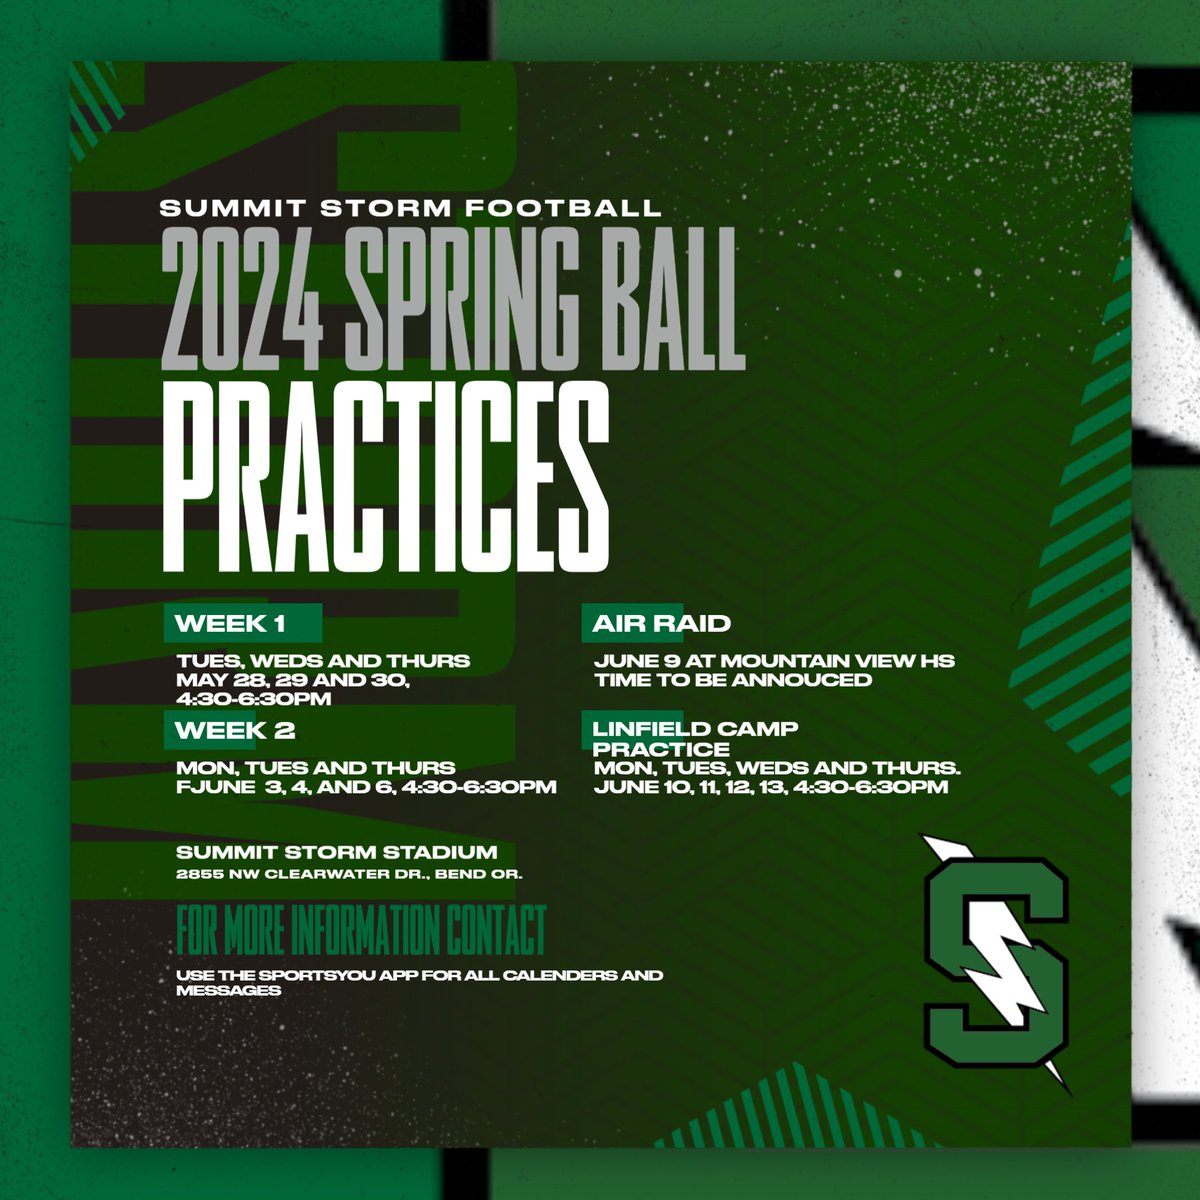 It all starts on Tuesday, May 28th. Make sure you are registered for spring ball and summer workouts through the Summit athletic department website.